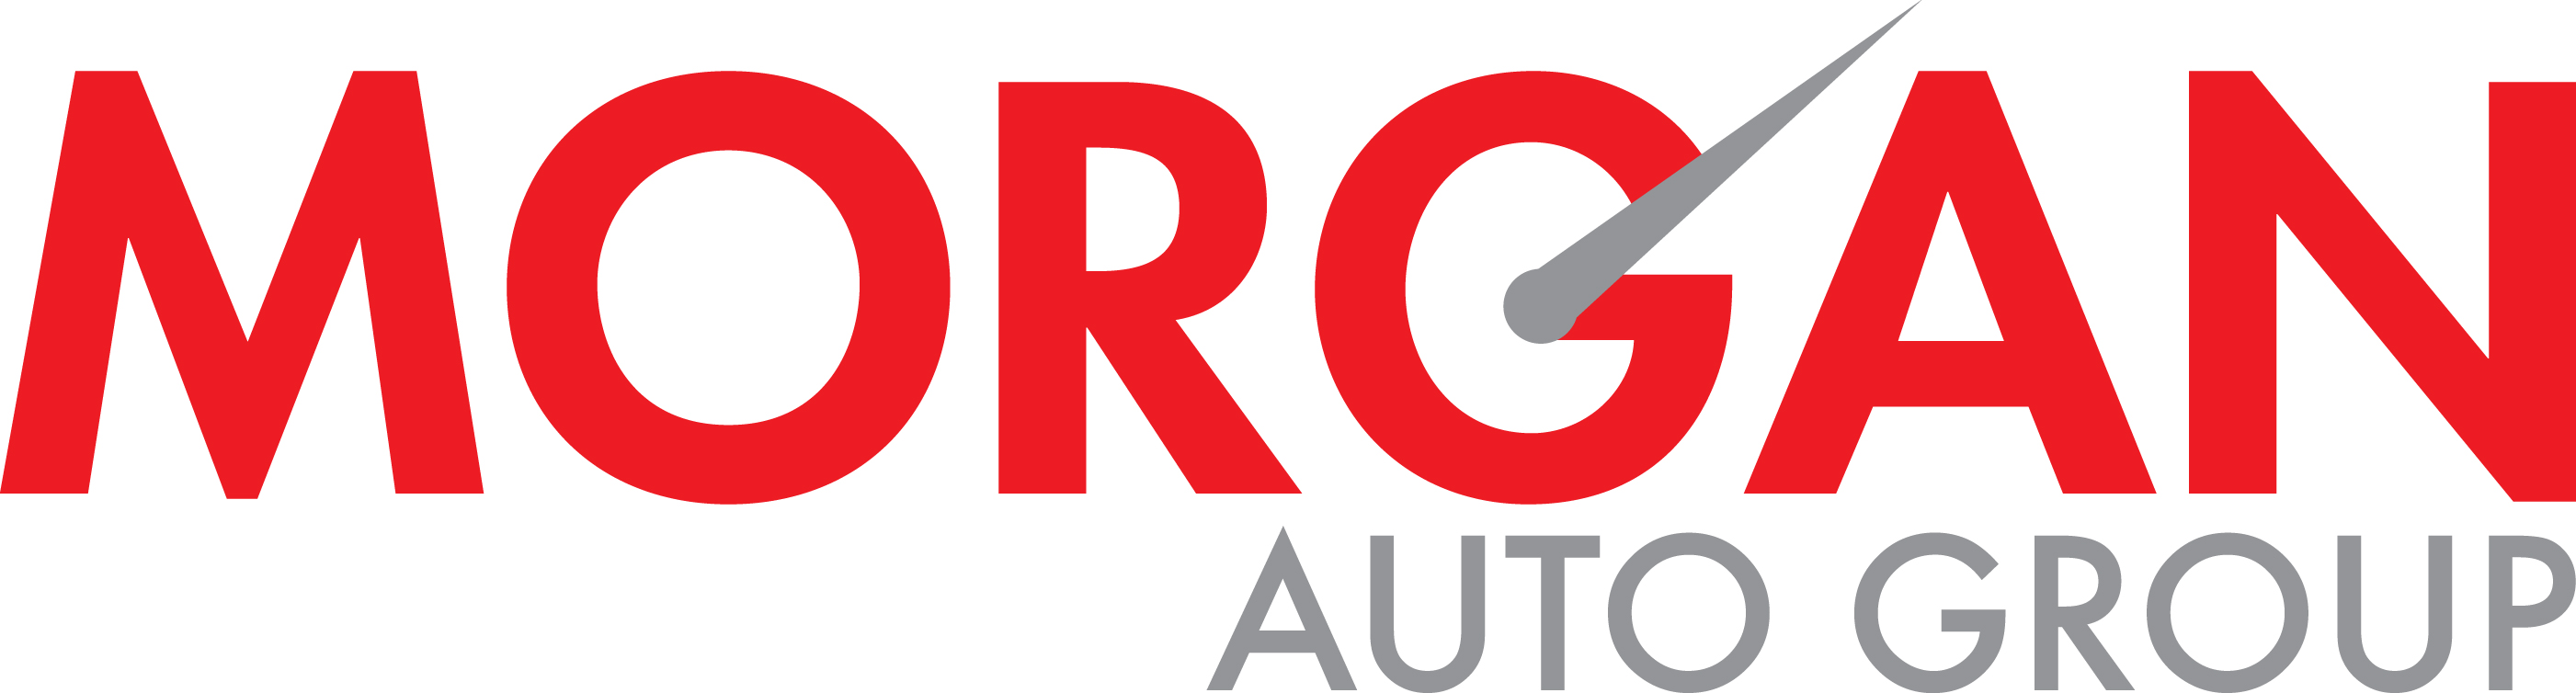 Morgan Auto Group acquires 2 new dealers